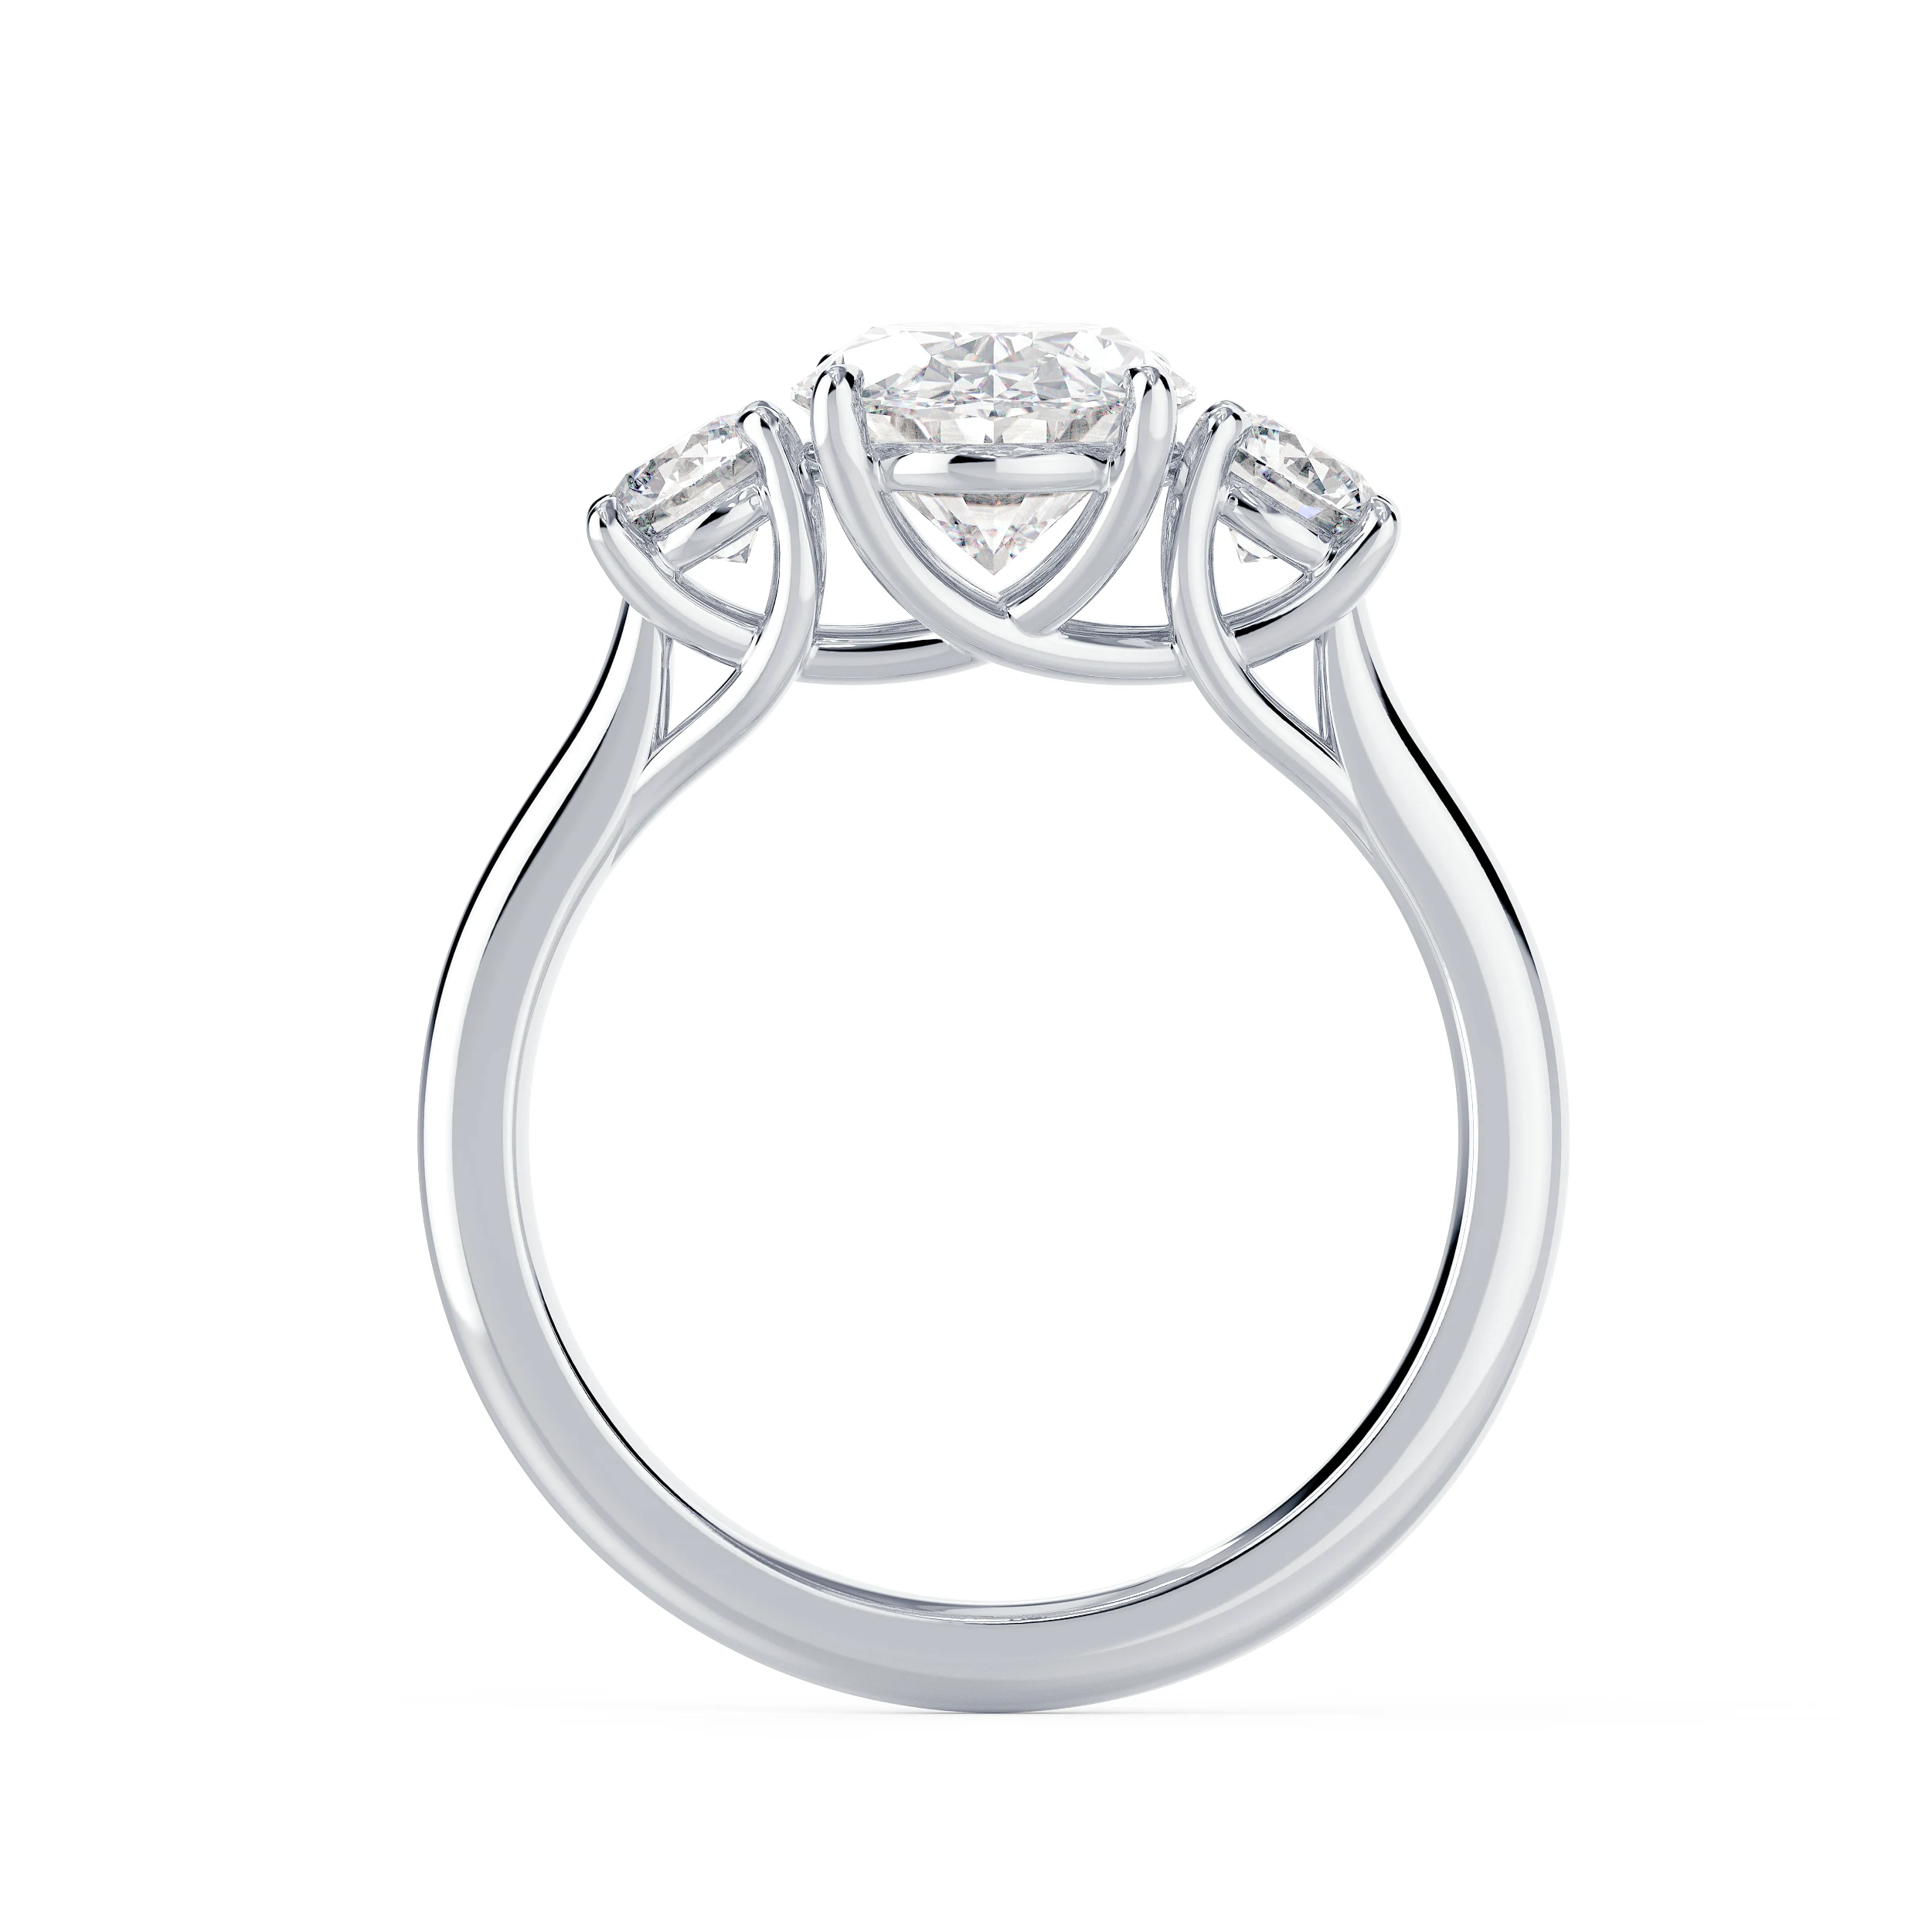 Man Made Diamonds set in White Gold Oval and Round Setting (Profile View)